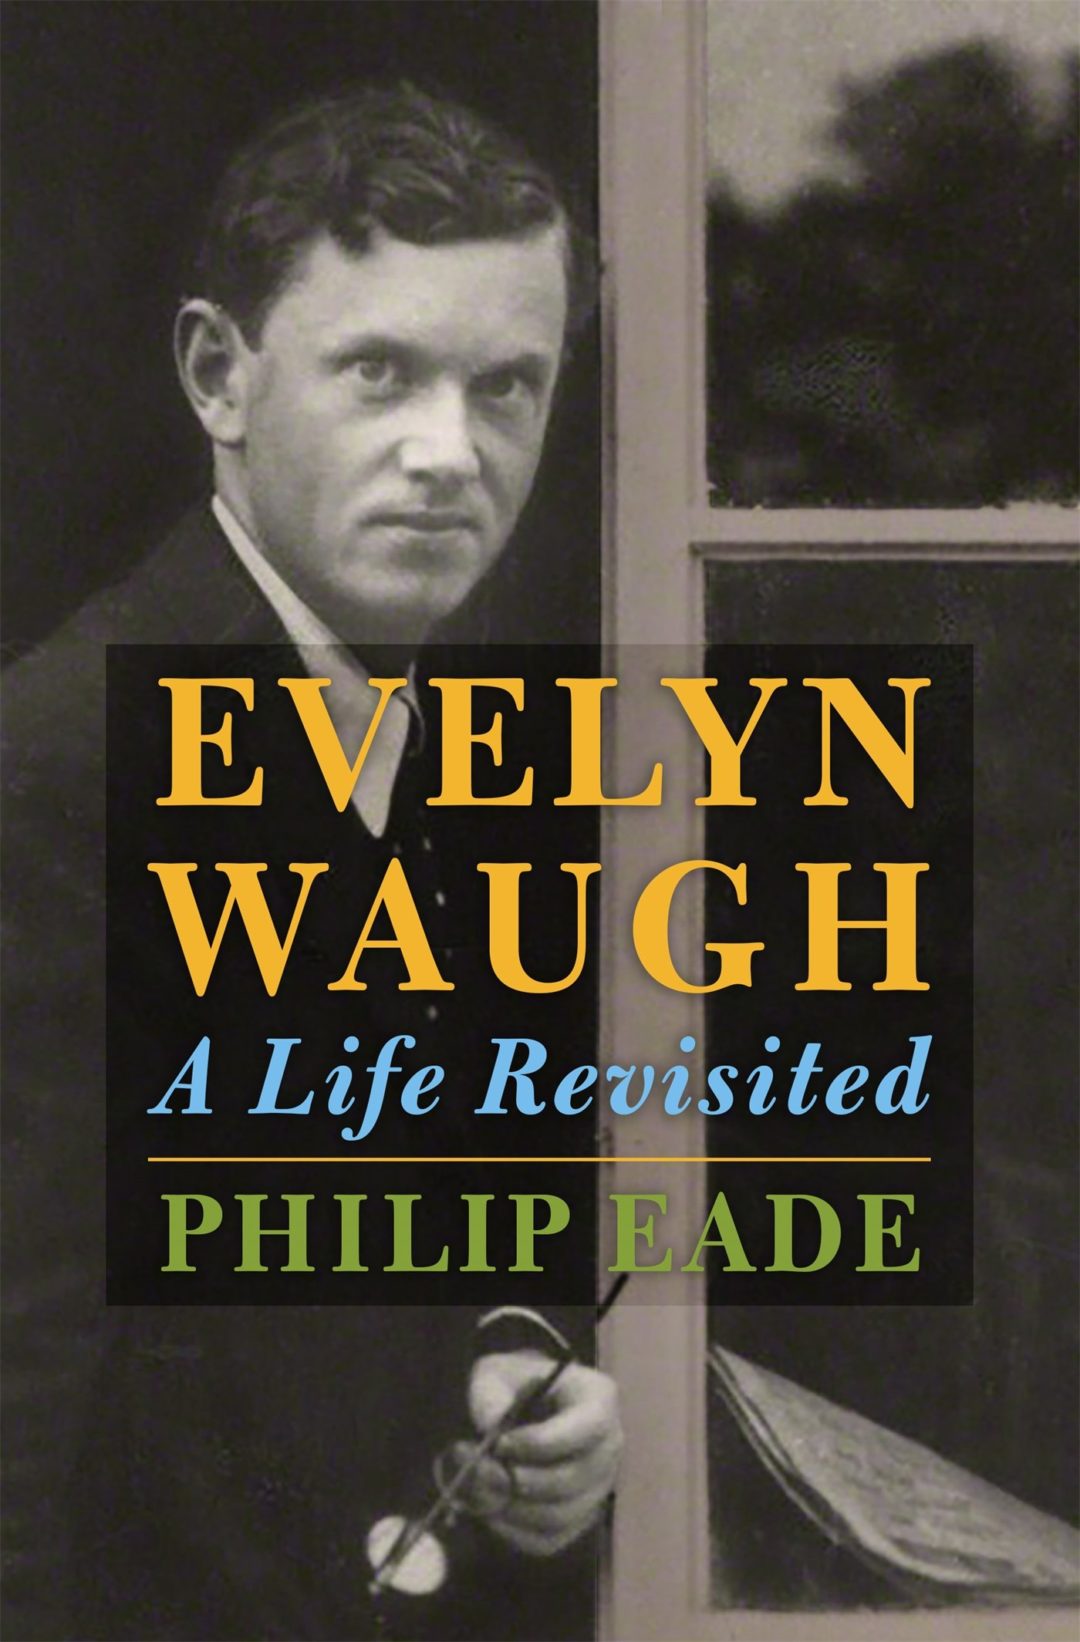 the essays articles and reviews of evelyn waugh